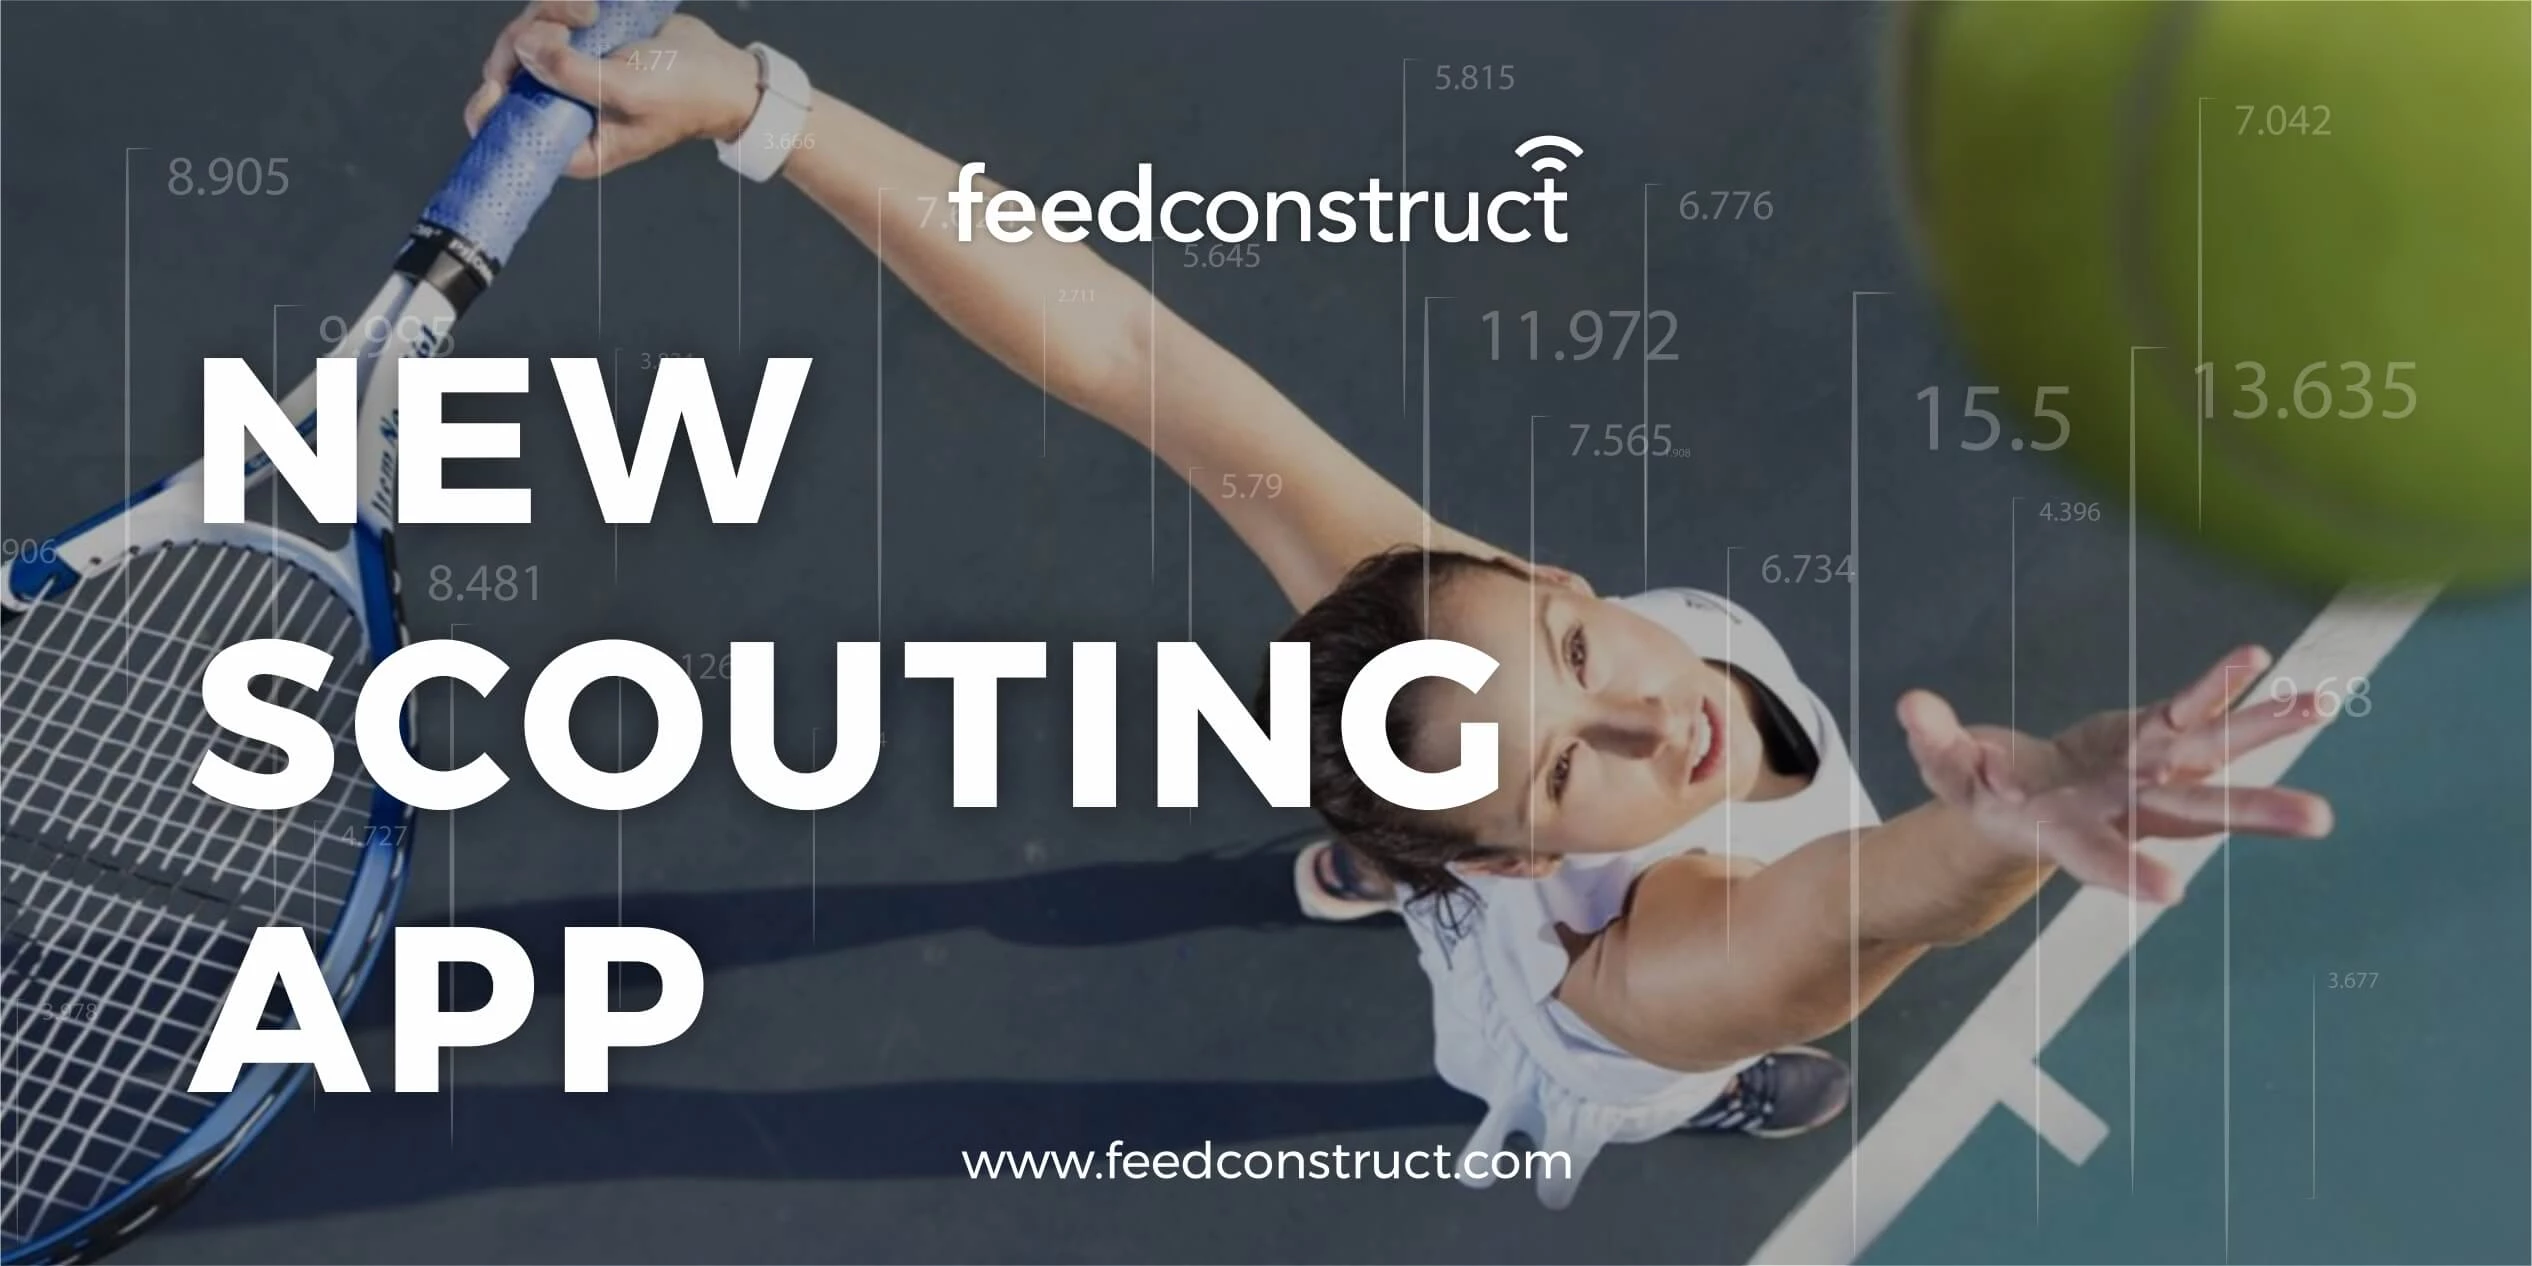 FeedConstruct’s new scouting app to cover Tennis